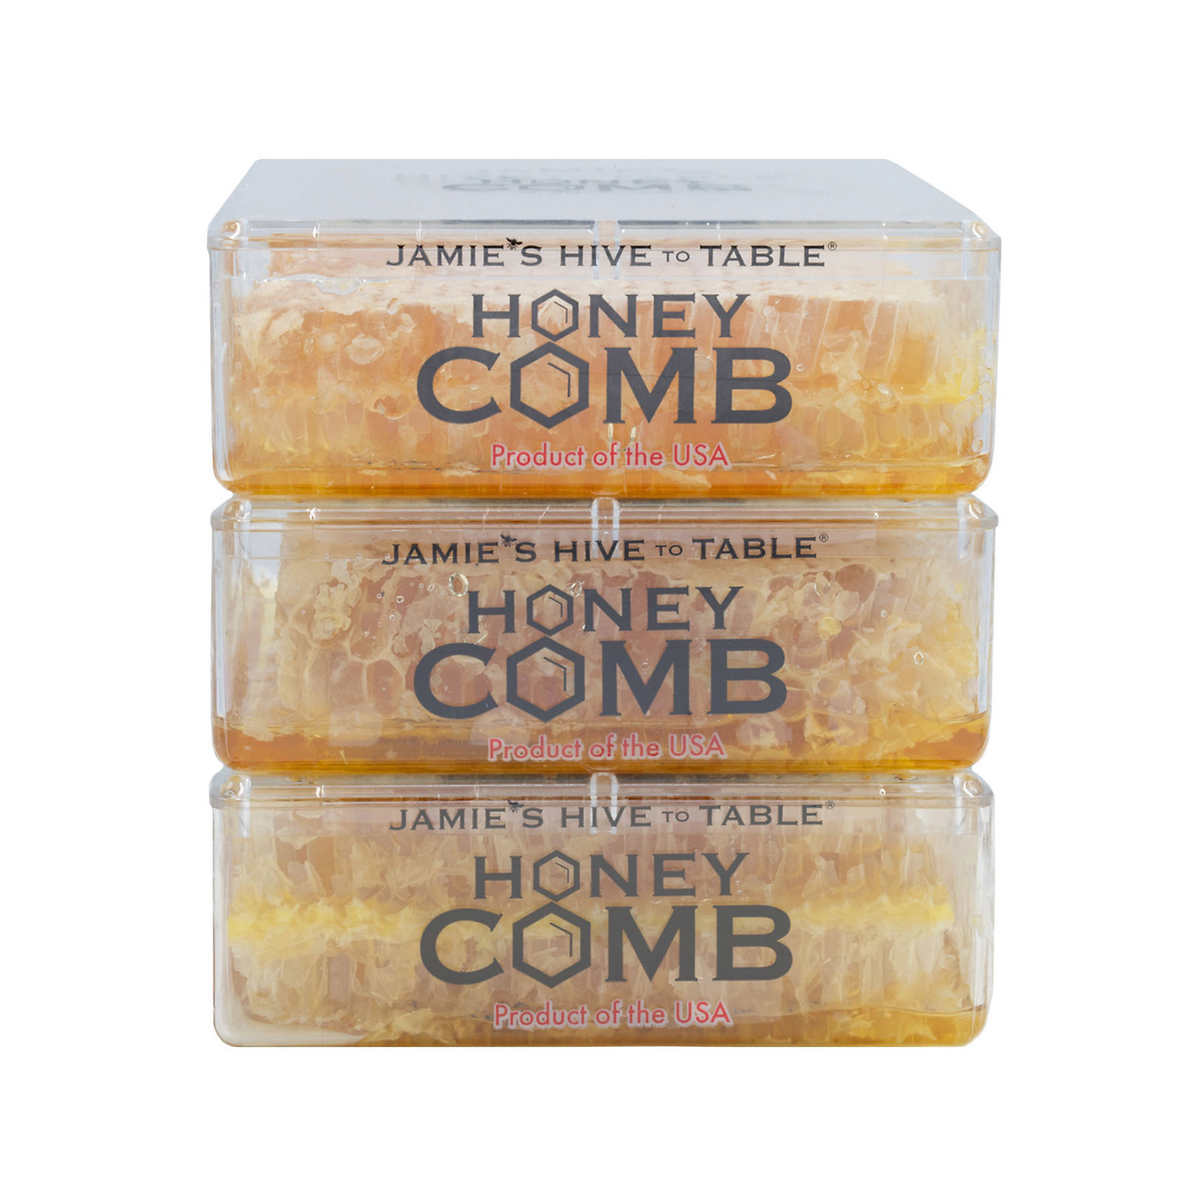 Jamie's Hive To Table 100% Pure Raw 12 oz. Honeycomb, 3-Pack